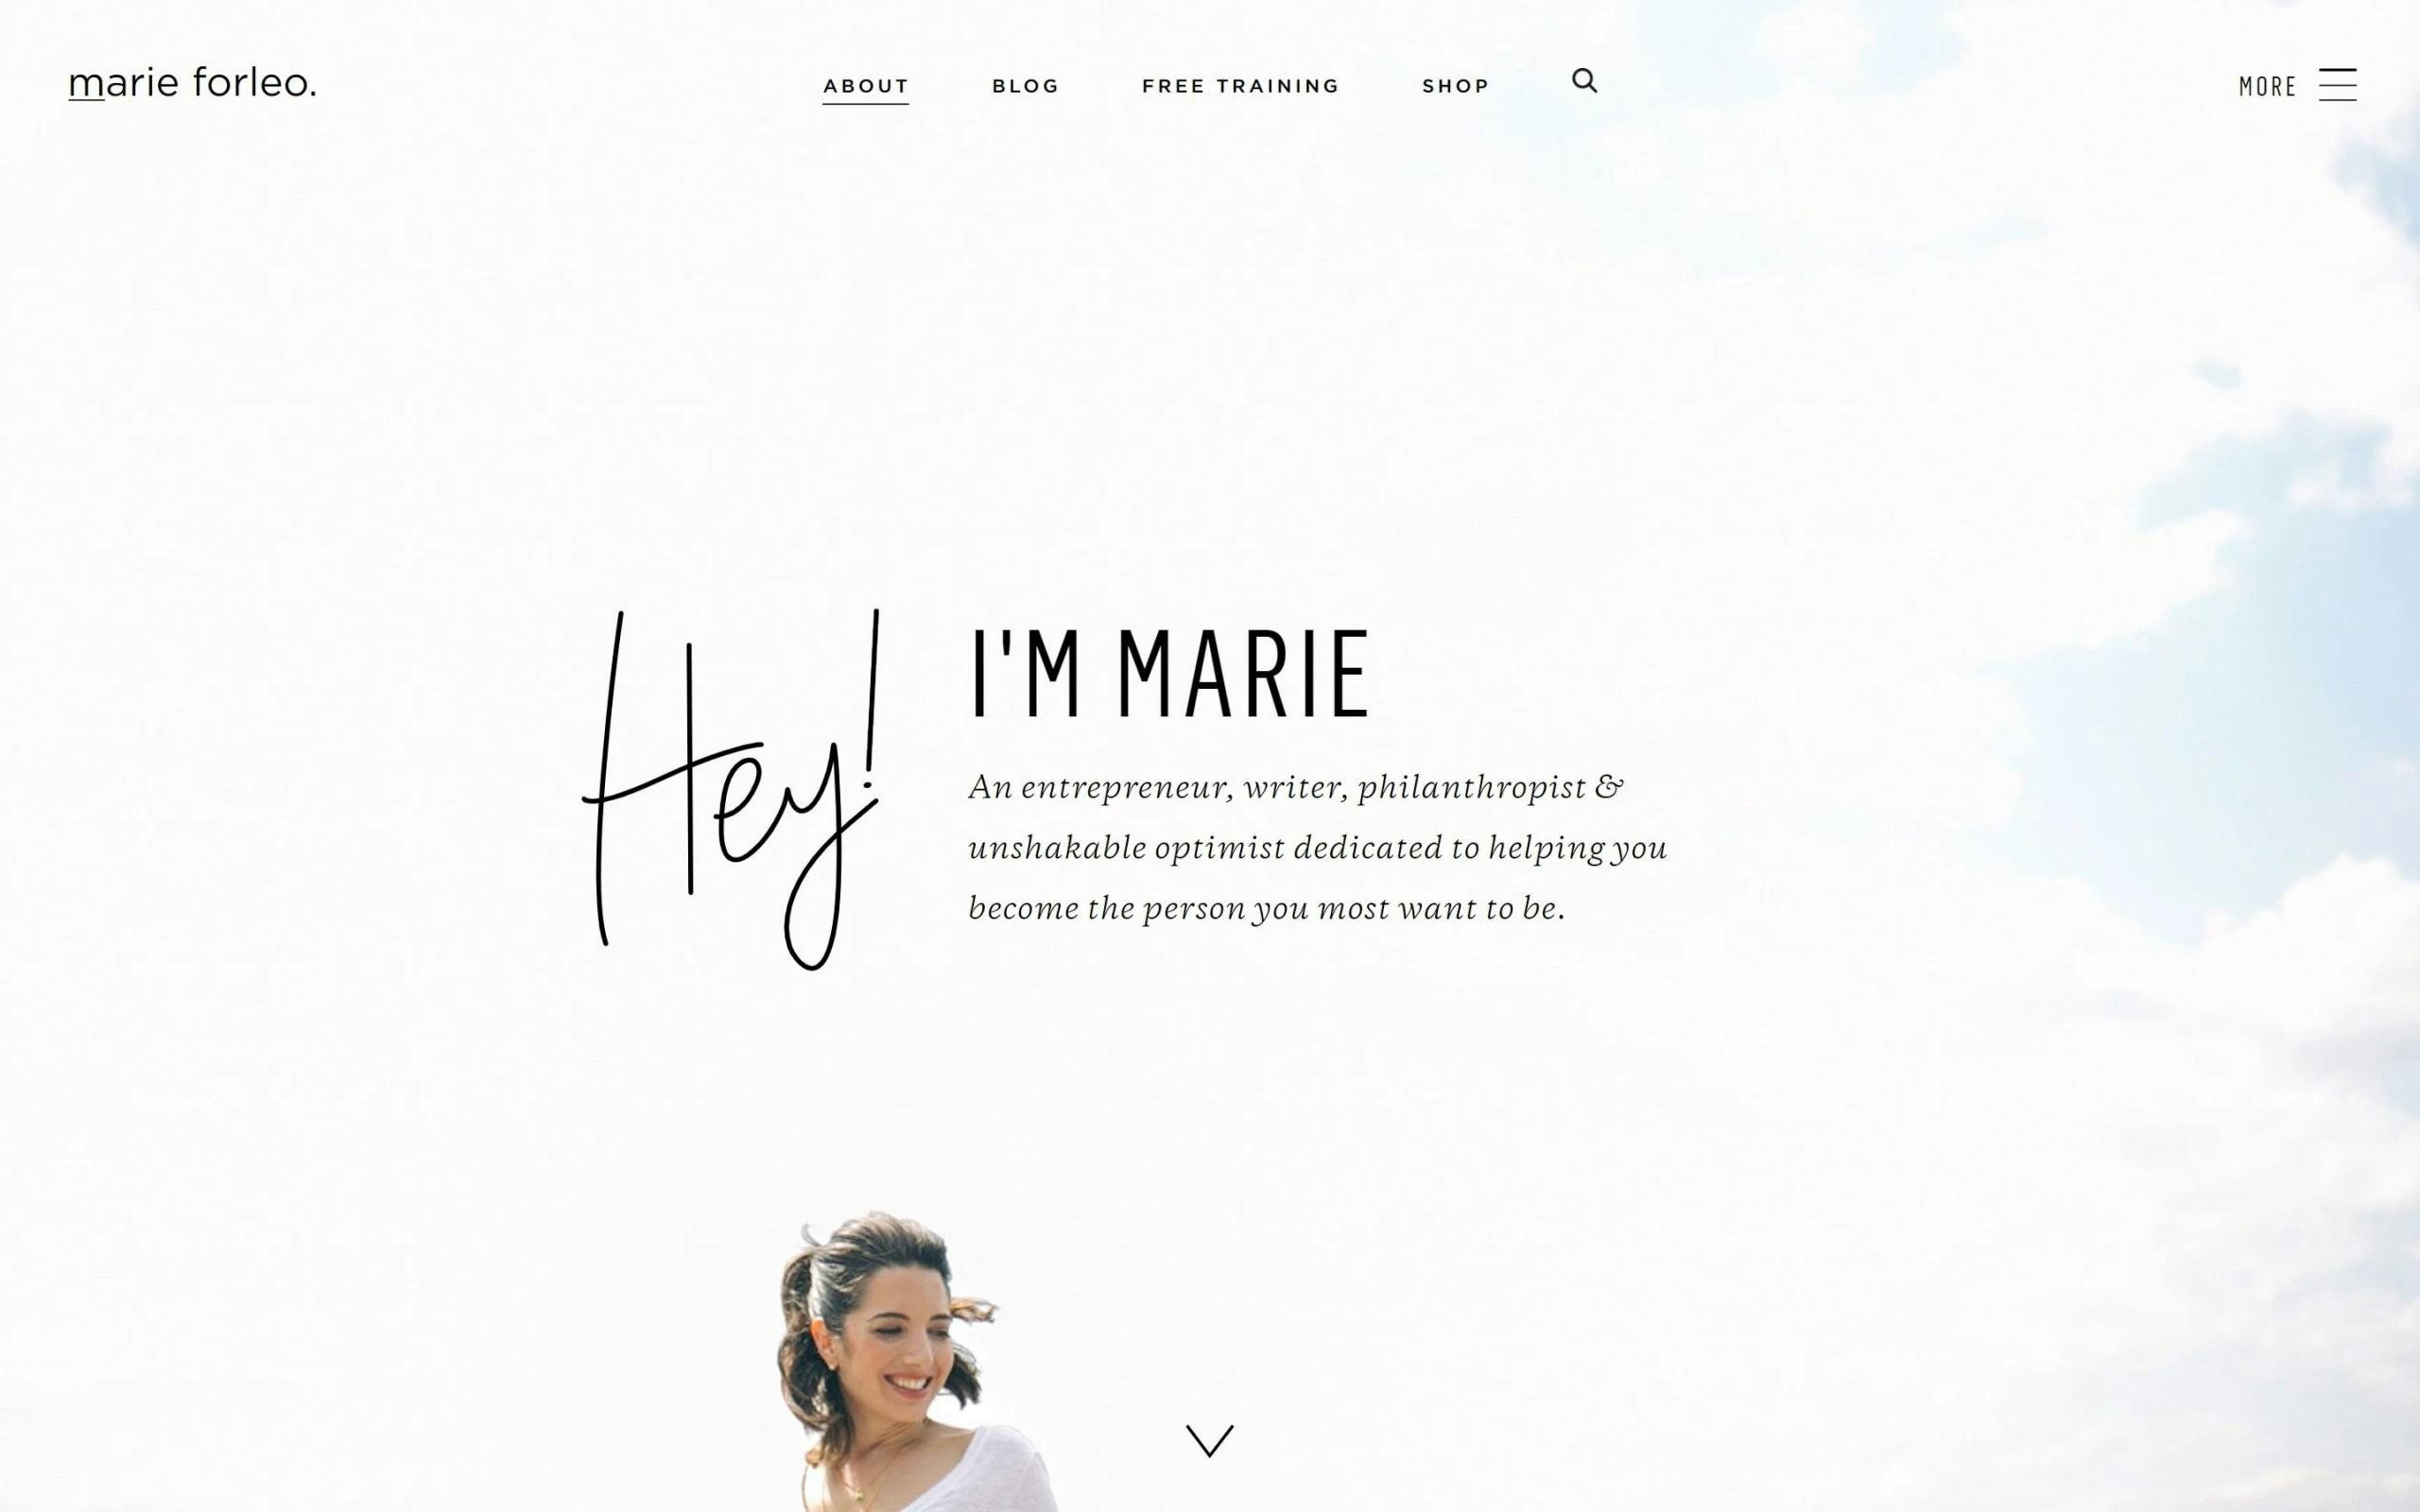 Marie Forleo about me page